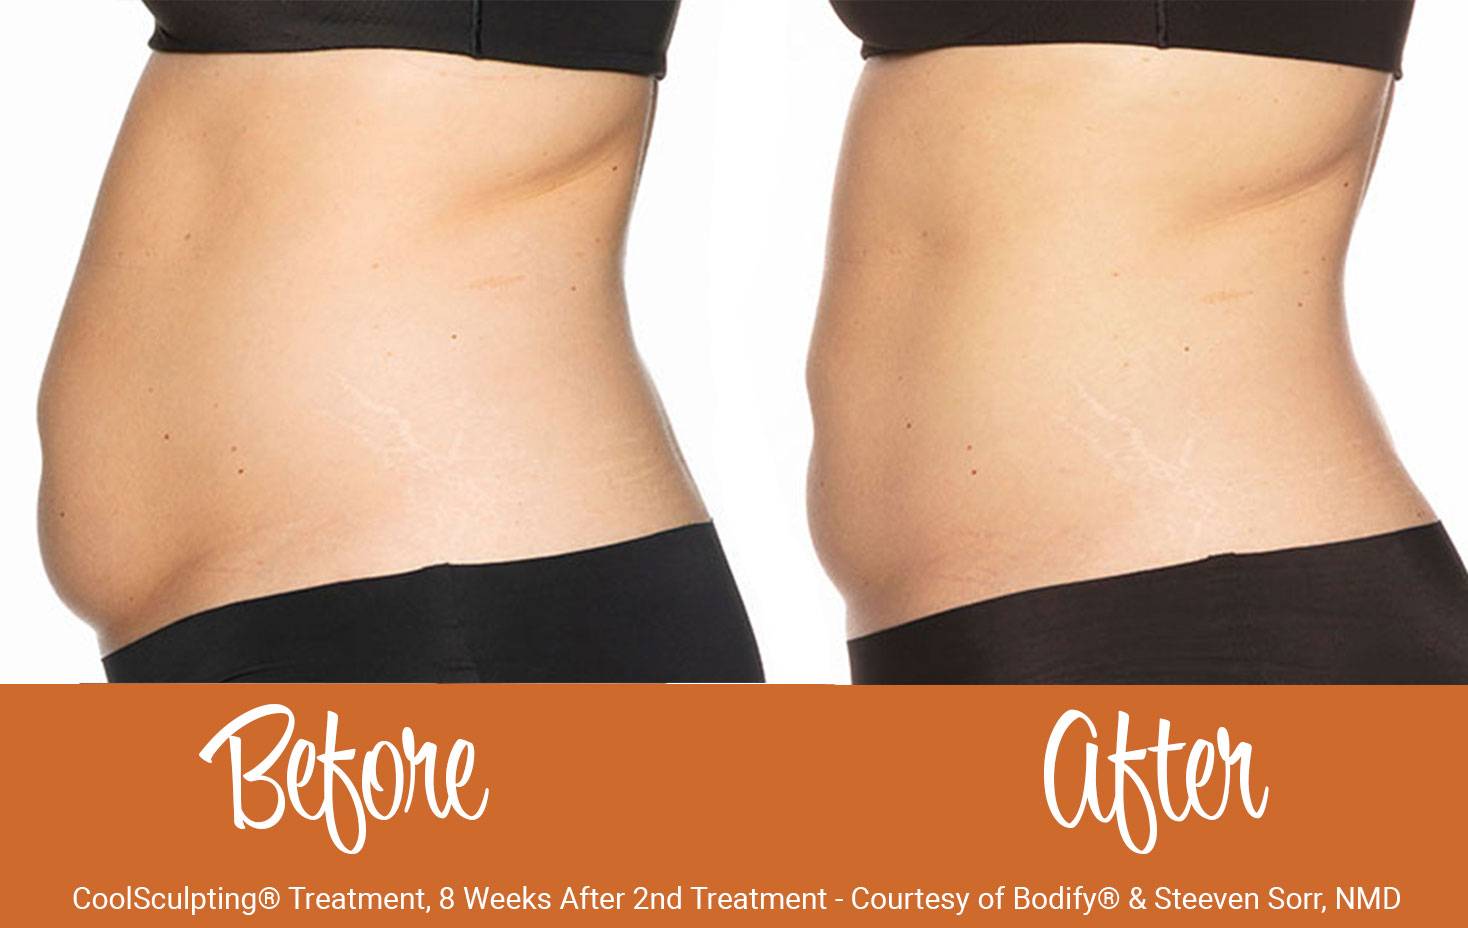 Before and after CoolSculpting® Treatment